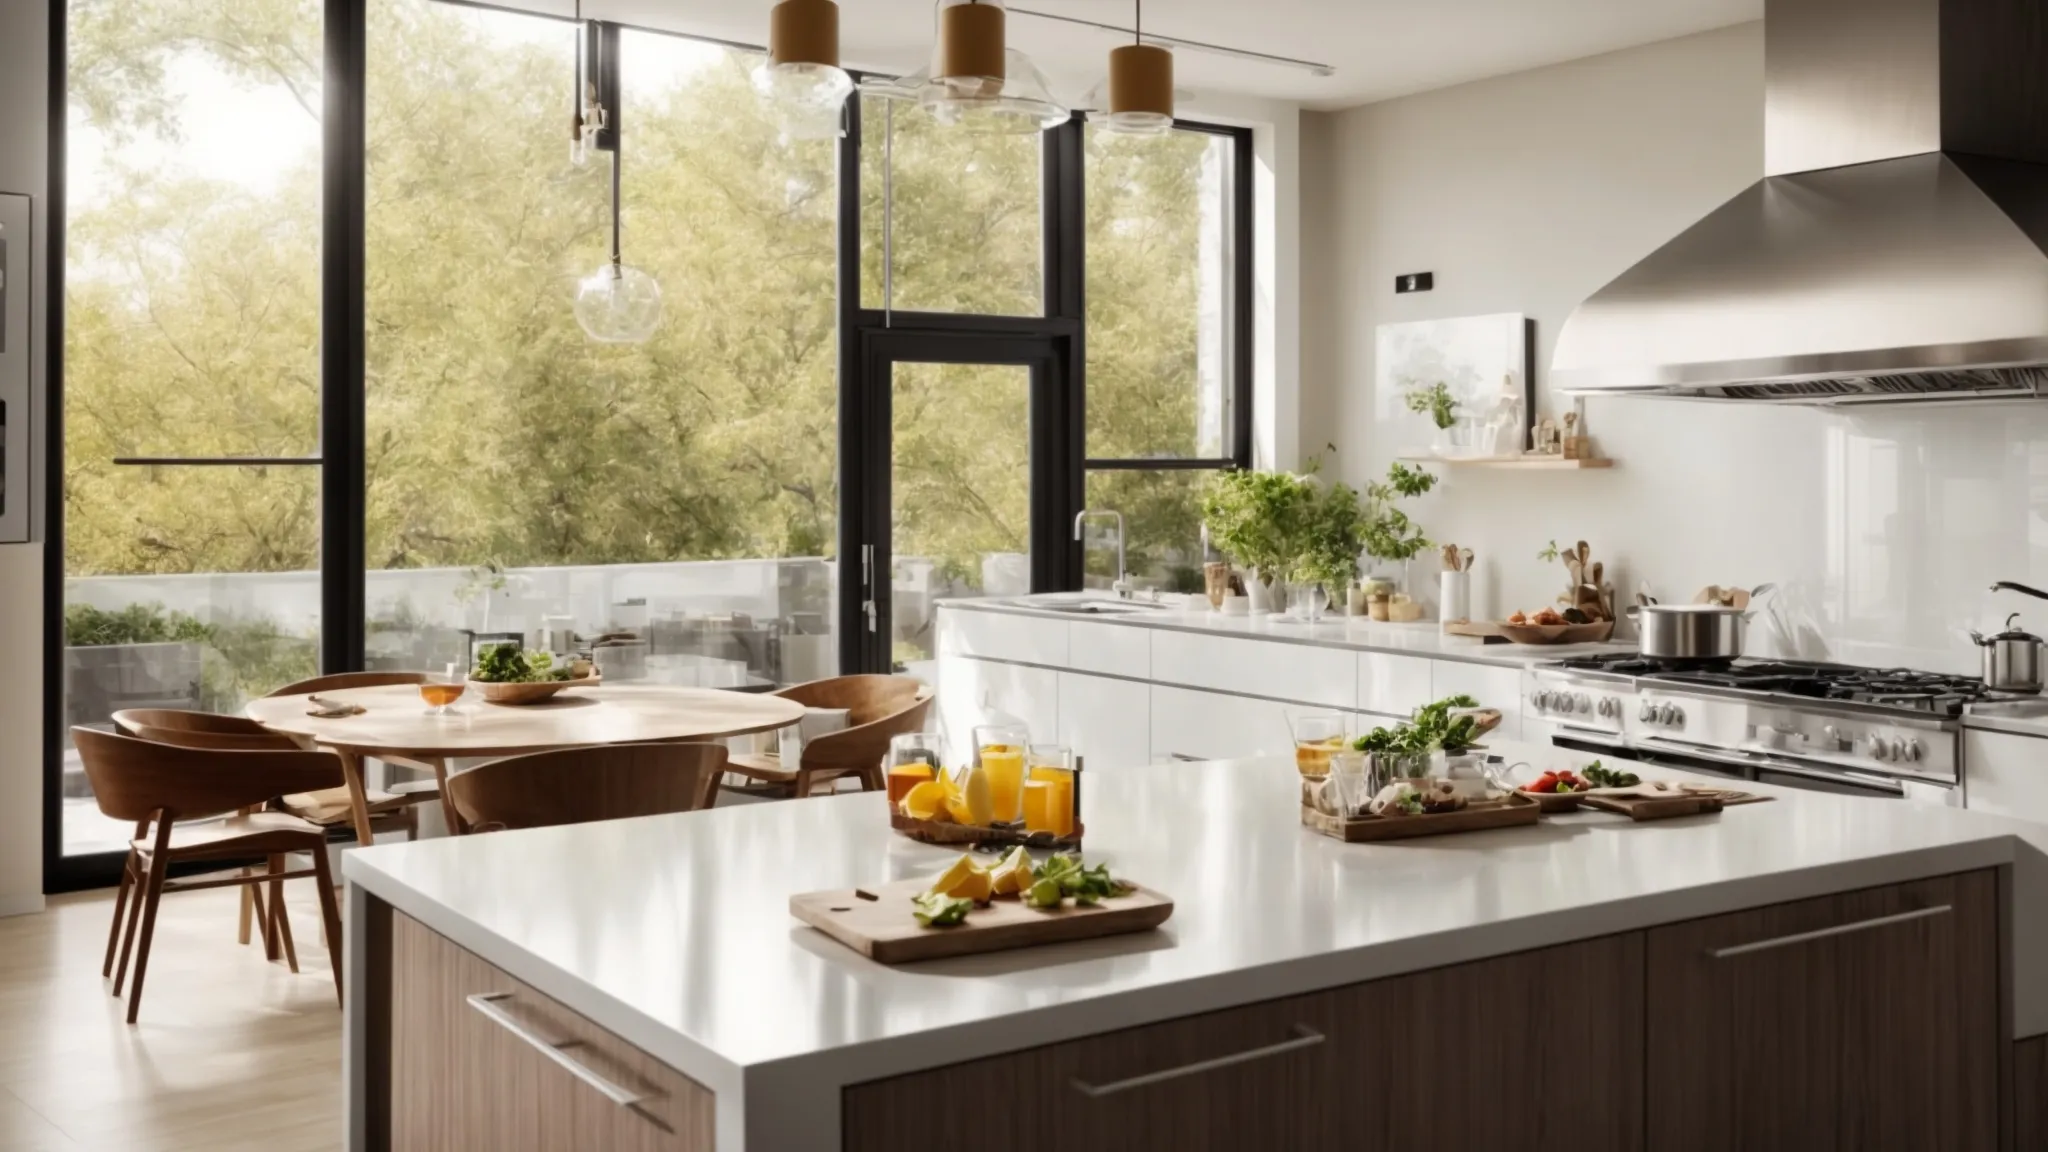 a modern kitchen showcasing energy-efficient appliances and solar panels visible through the window.